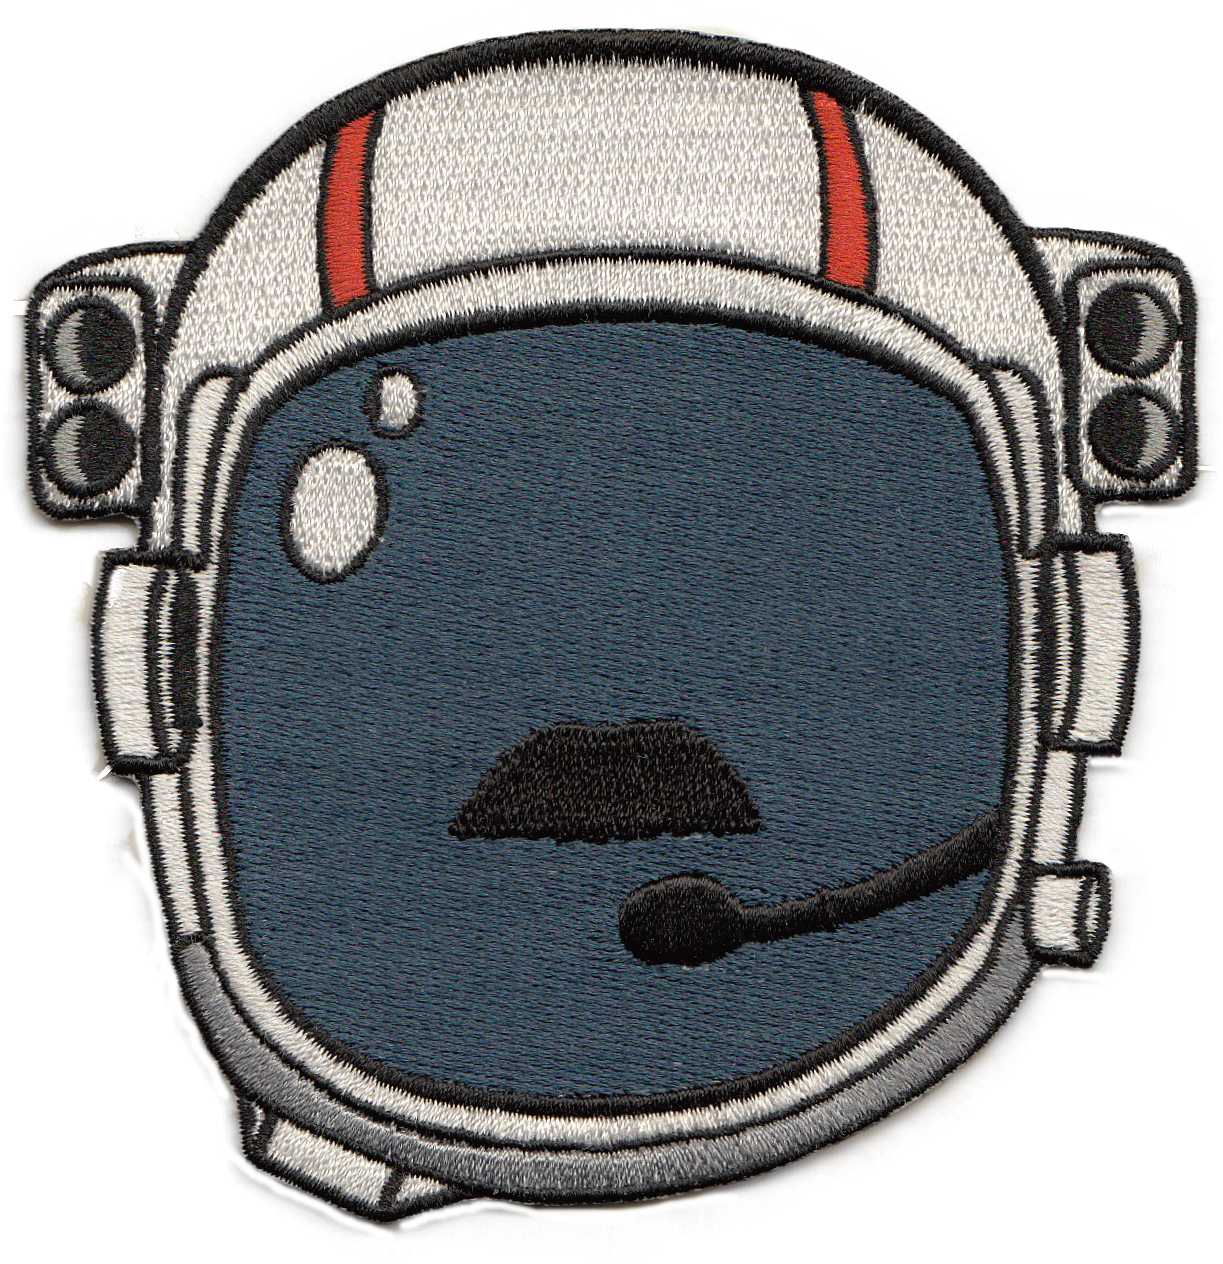 Helmet Astronaut PNG Image High Quality PNG Image